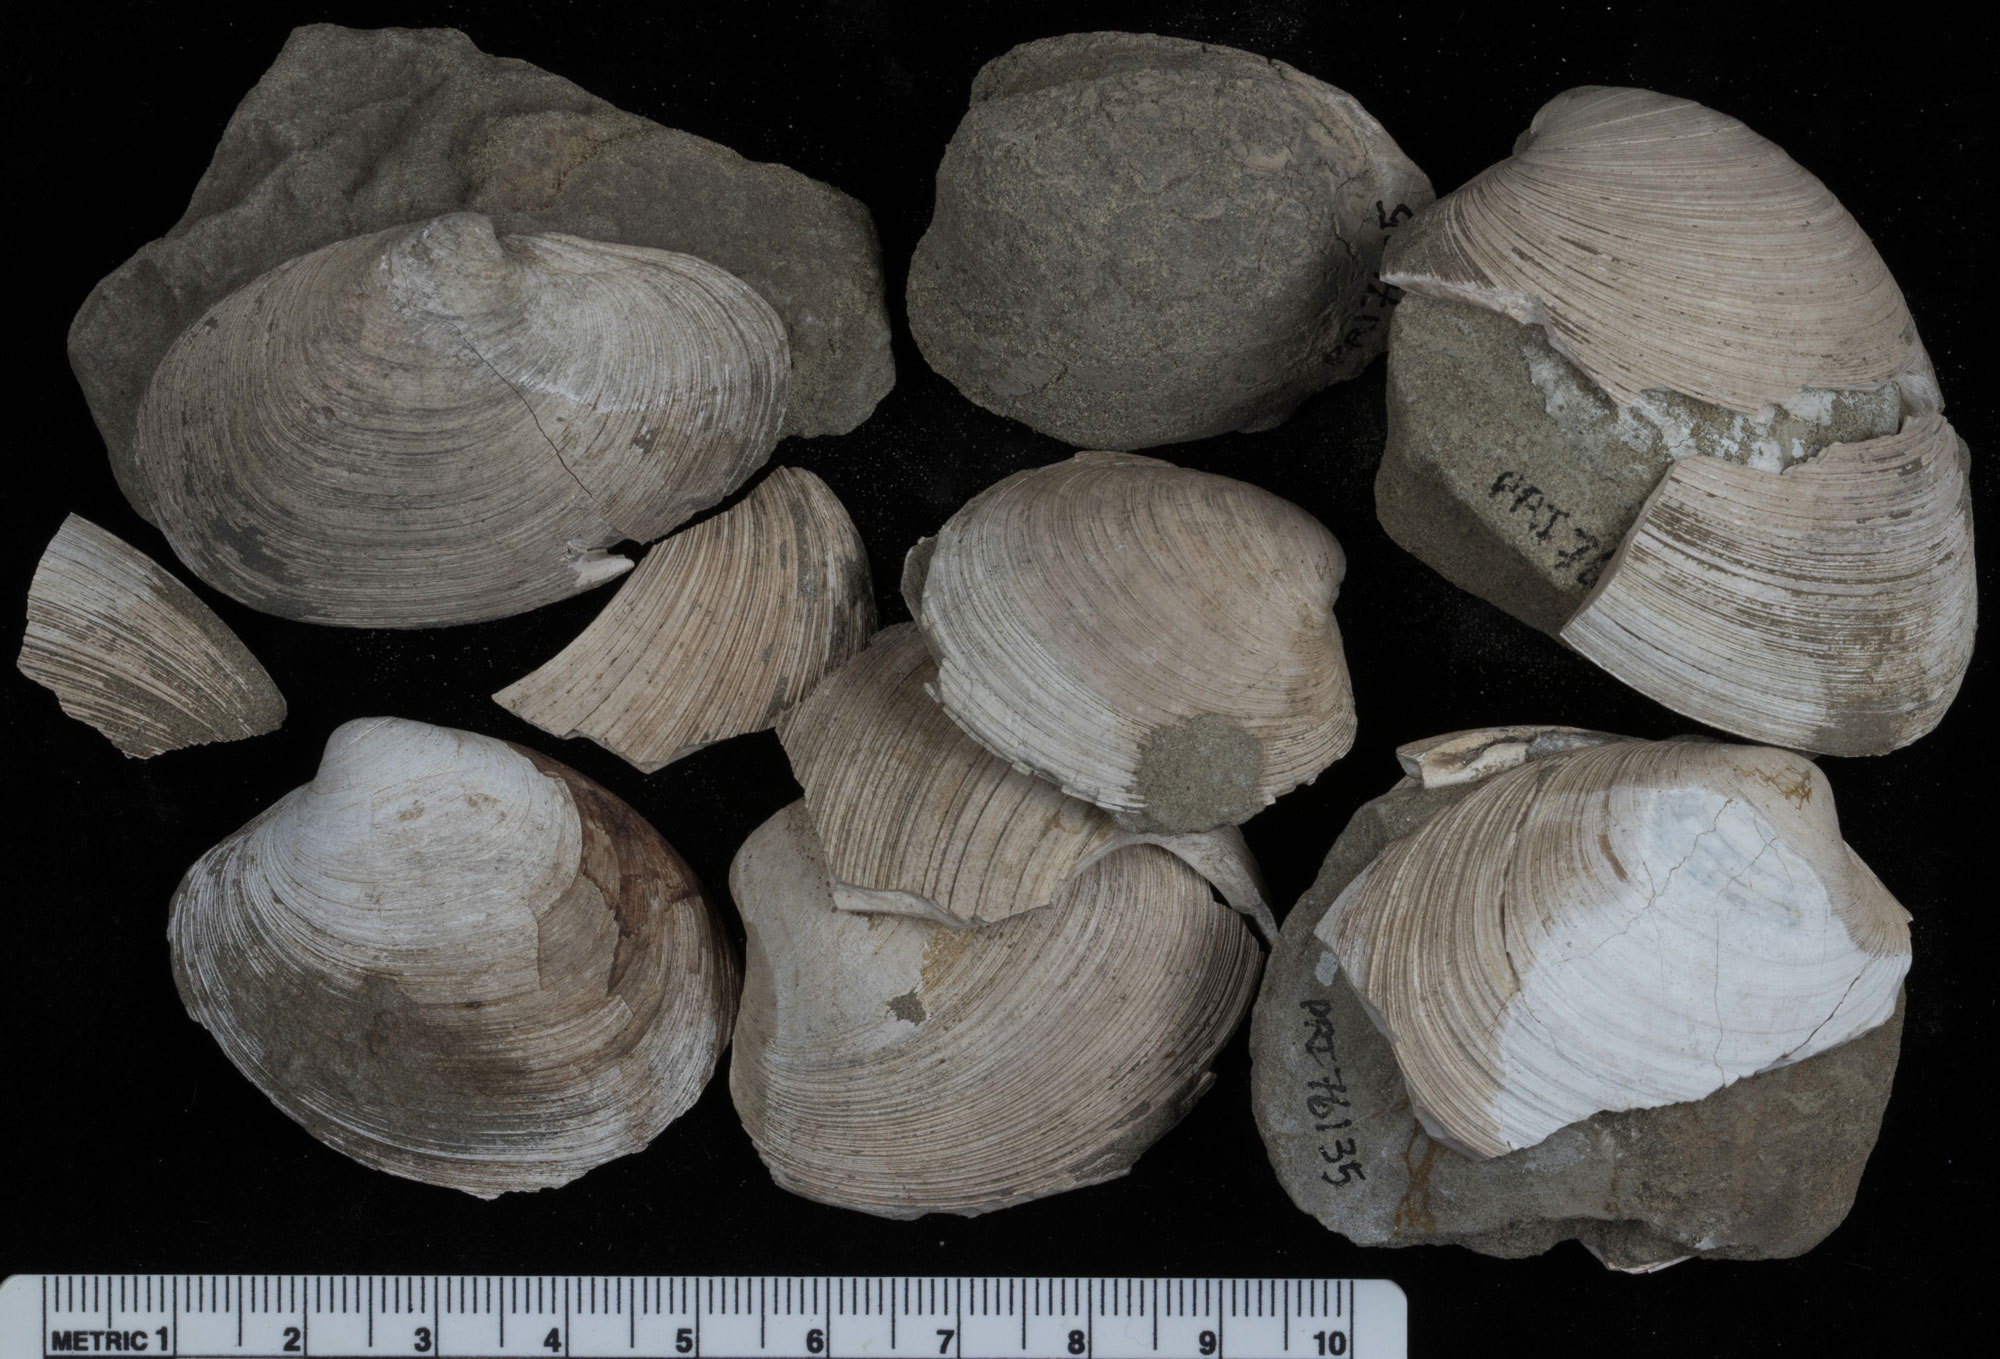 Photograph of a group of clam shell valves (one part of a two part shell) from the Miocene of Washington. The valves are beige to white and show a series of concentric grown lines. The photo shows about seven valves and some broken valve fragments.